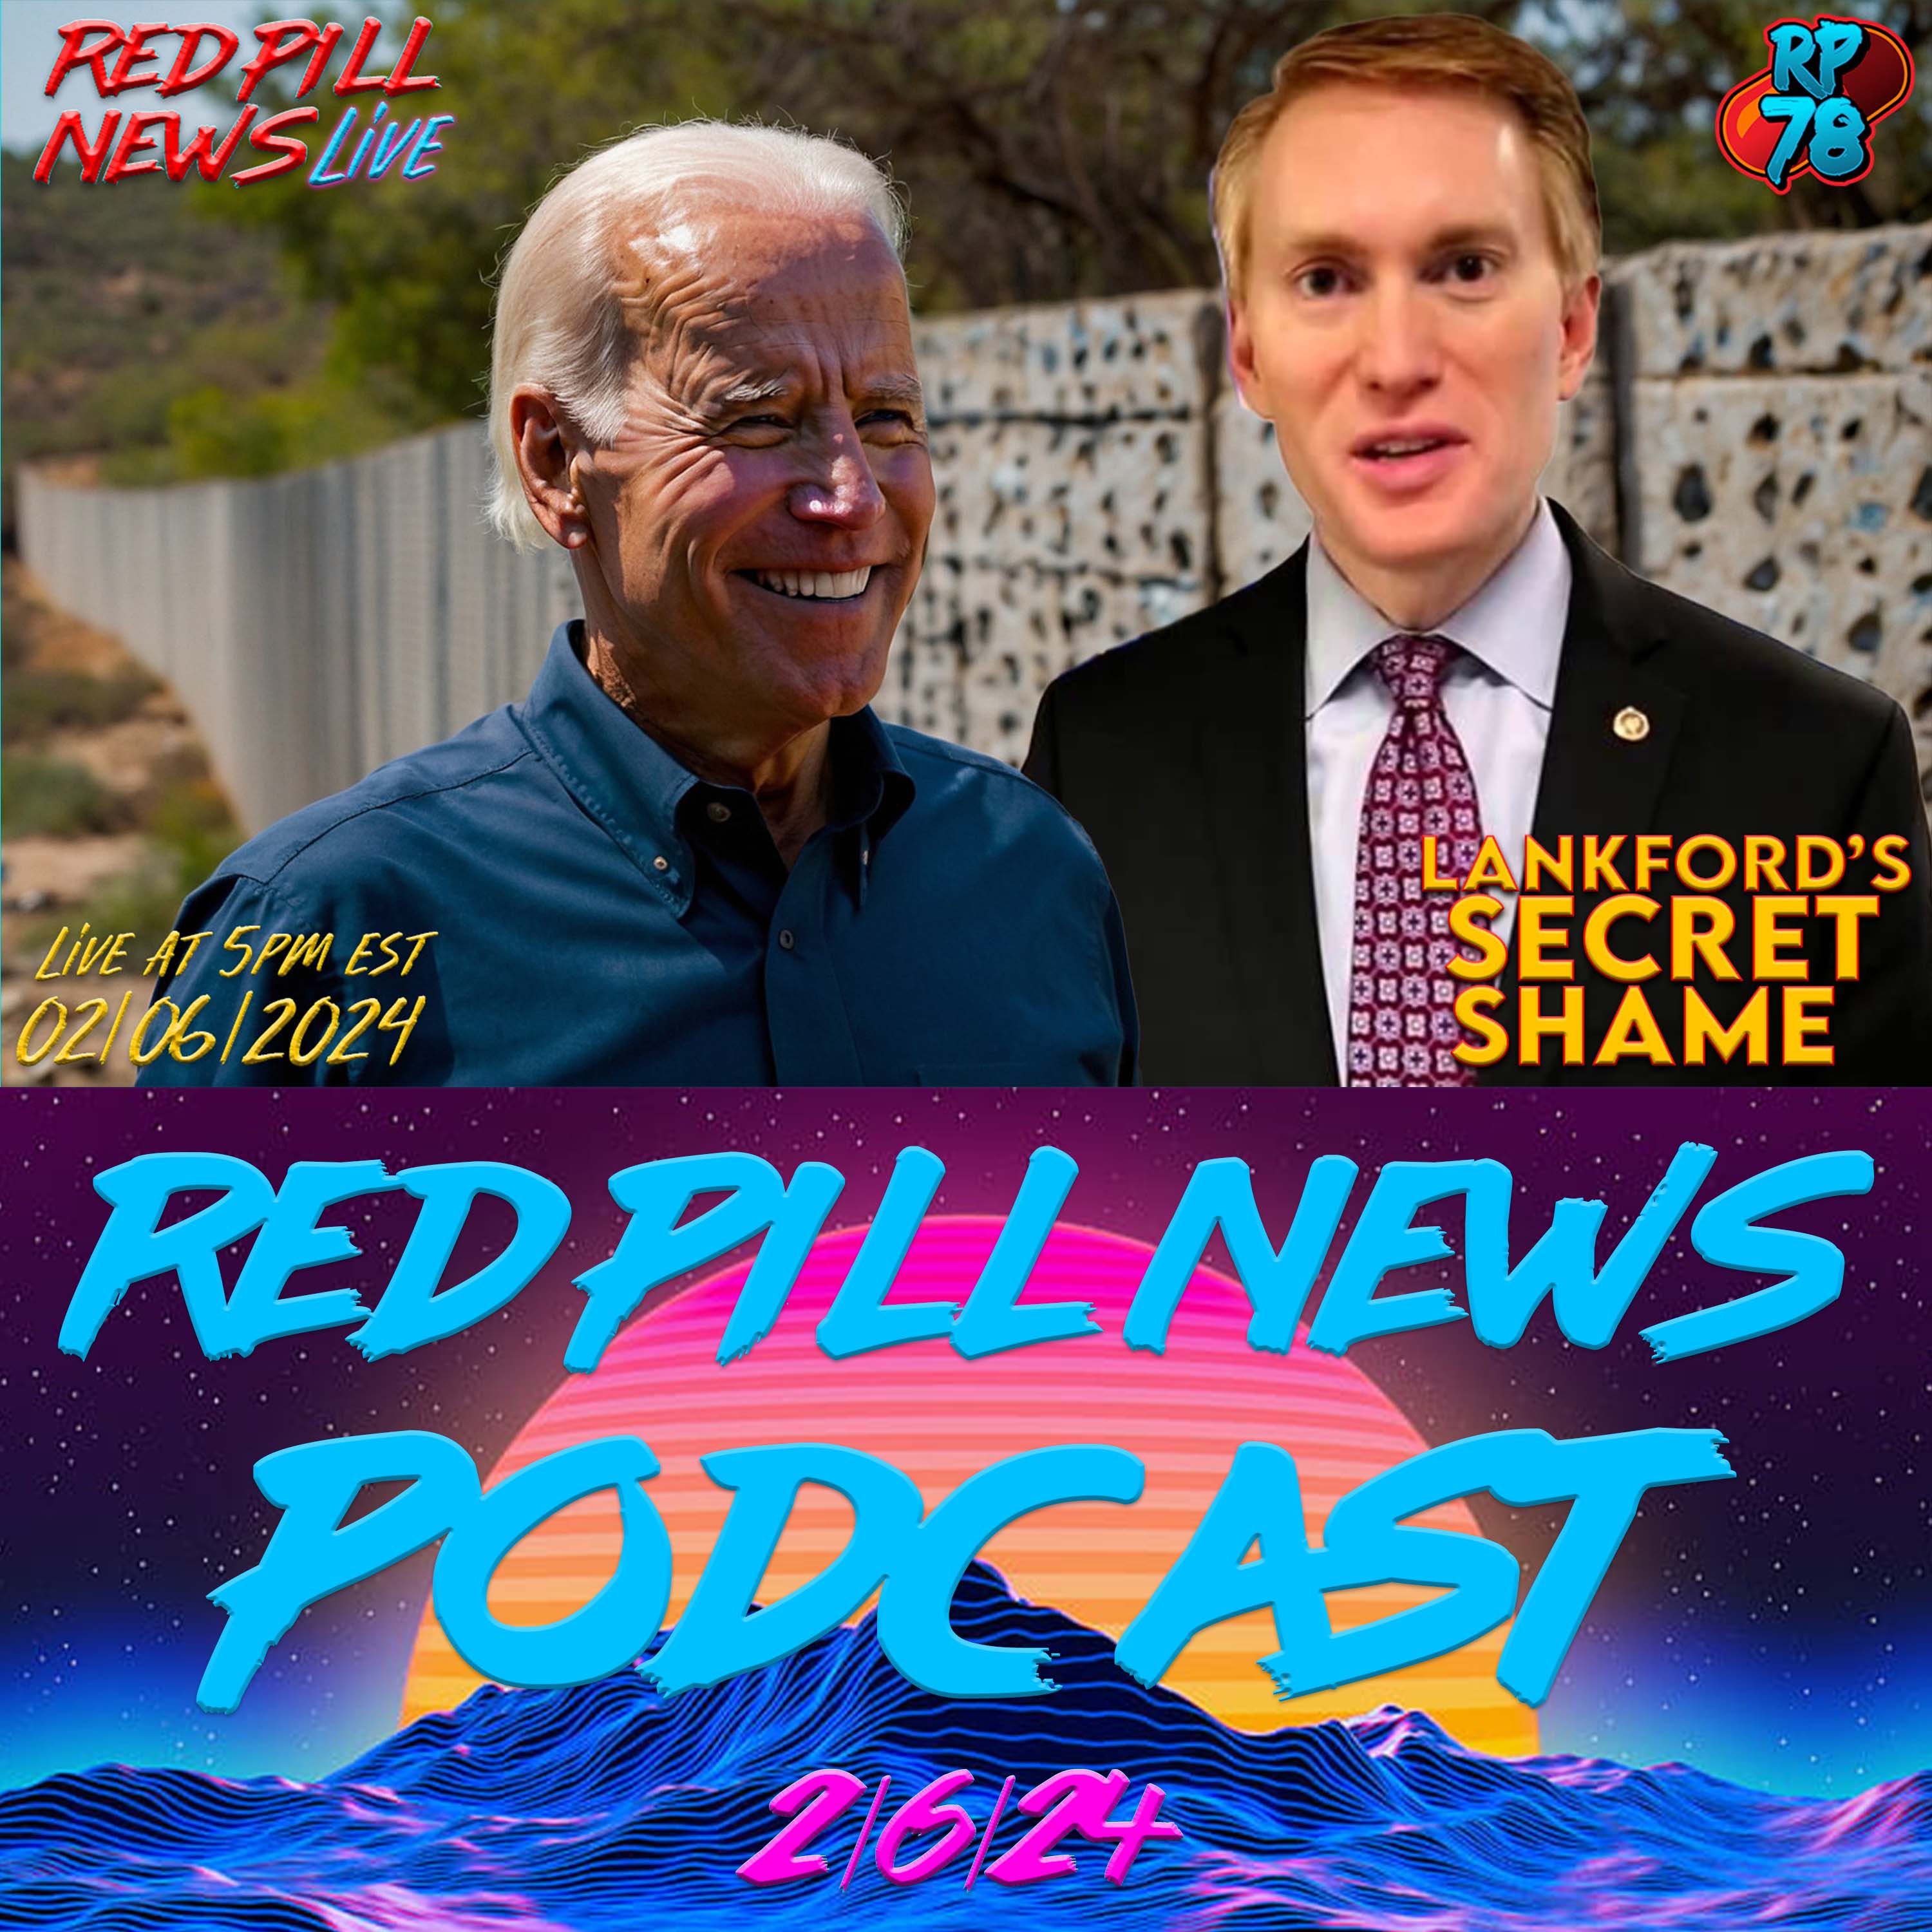 Border Invasion Bill Suggests Possible Lankford Blackmail on Red Pill News Live